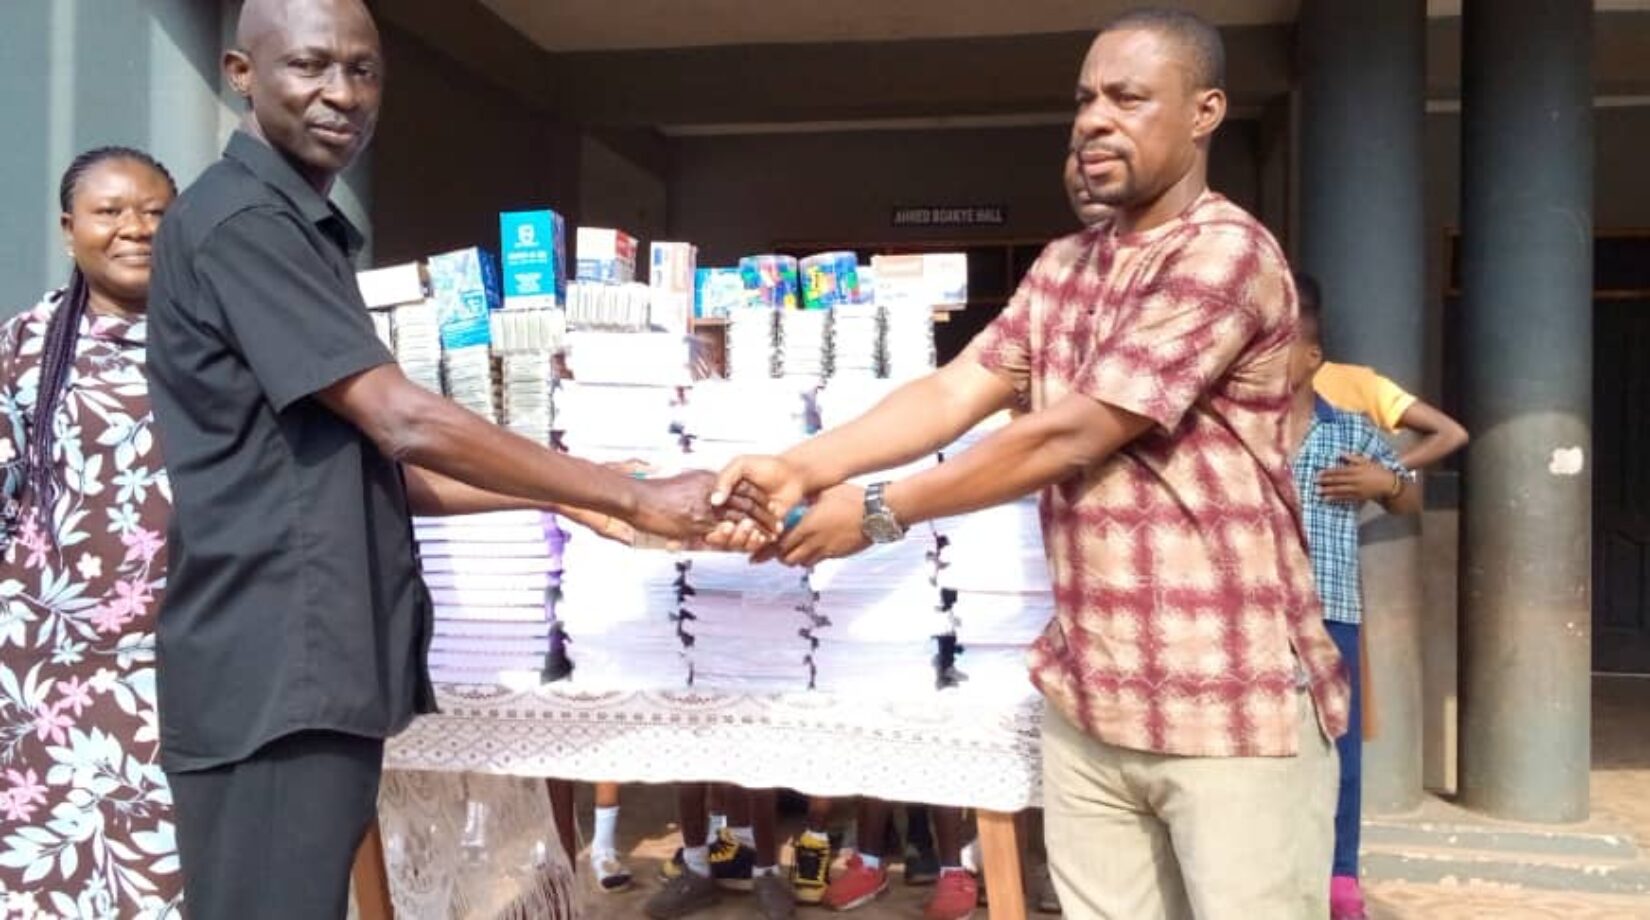 KROFROM EAST ASSEMBLY MEMBER DONATES EDUCATIONAL MATERIALS TO SCHOOLS